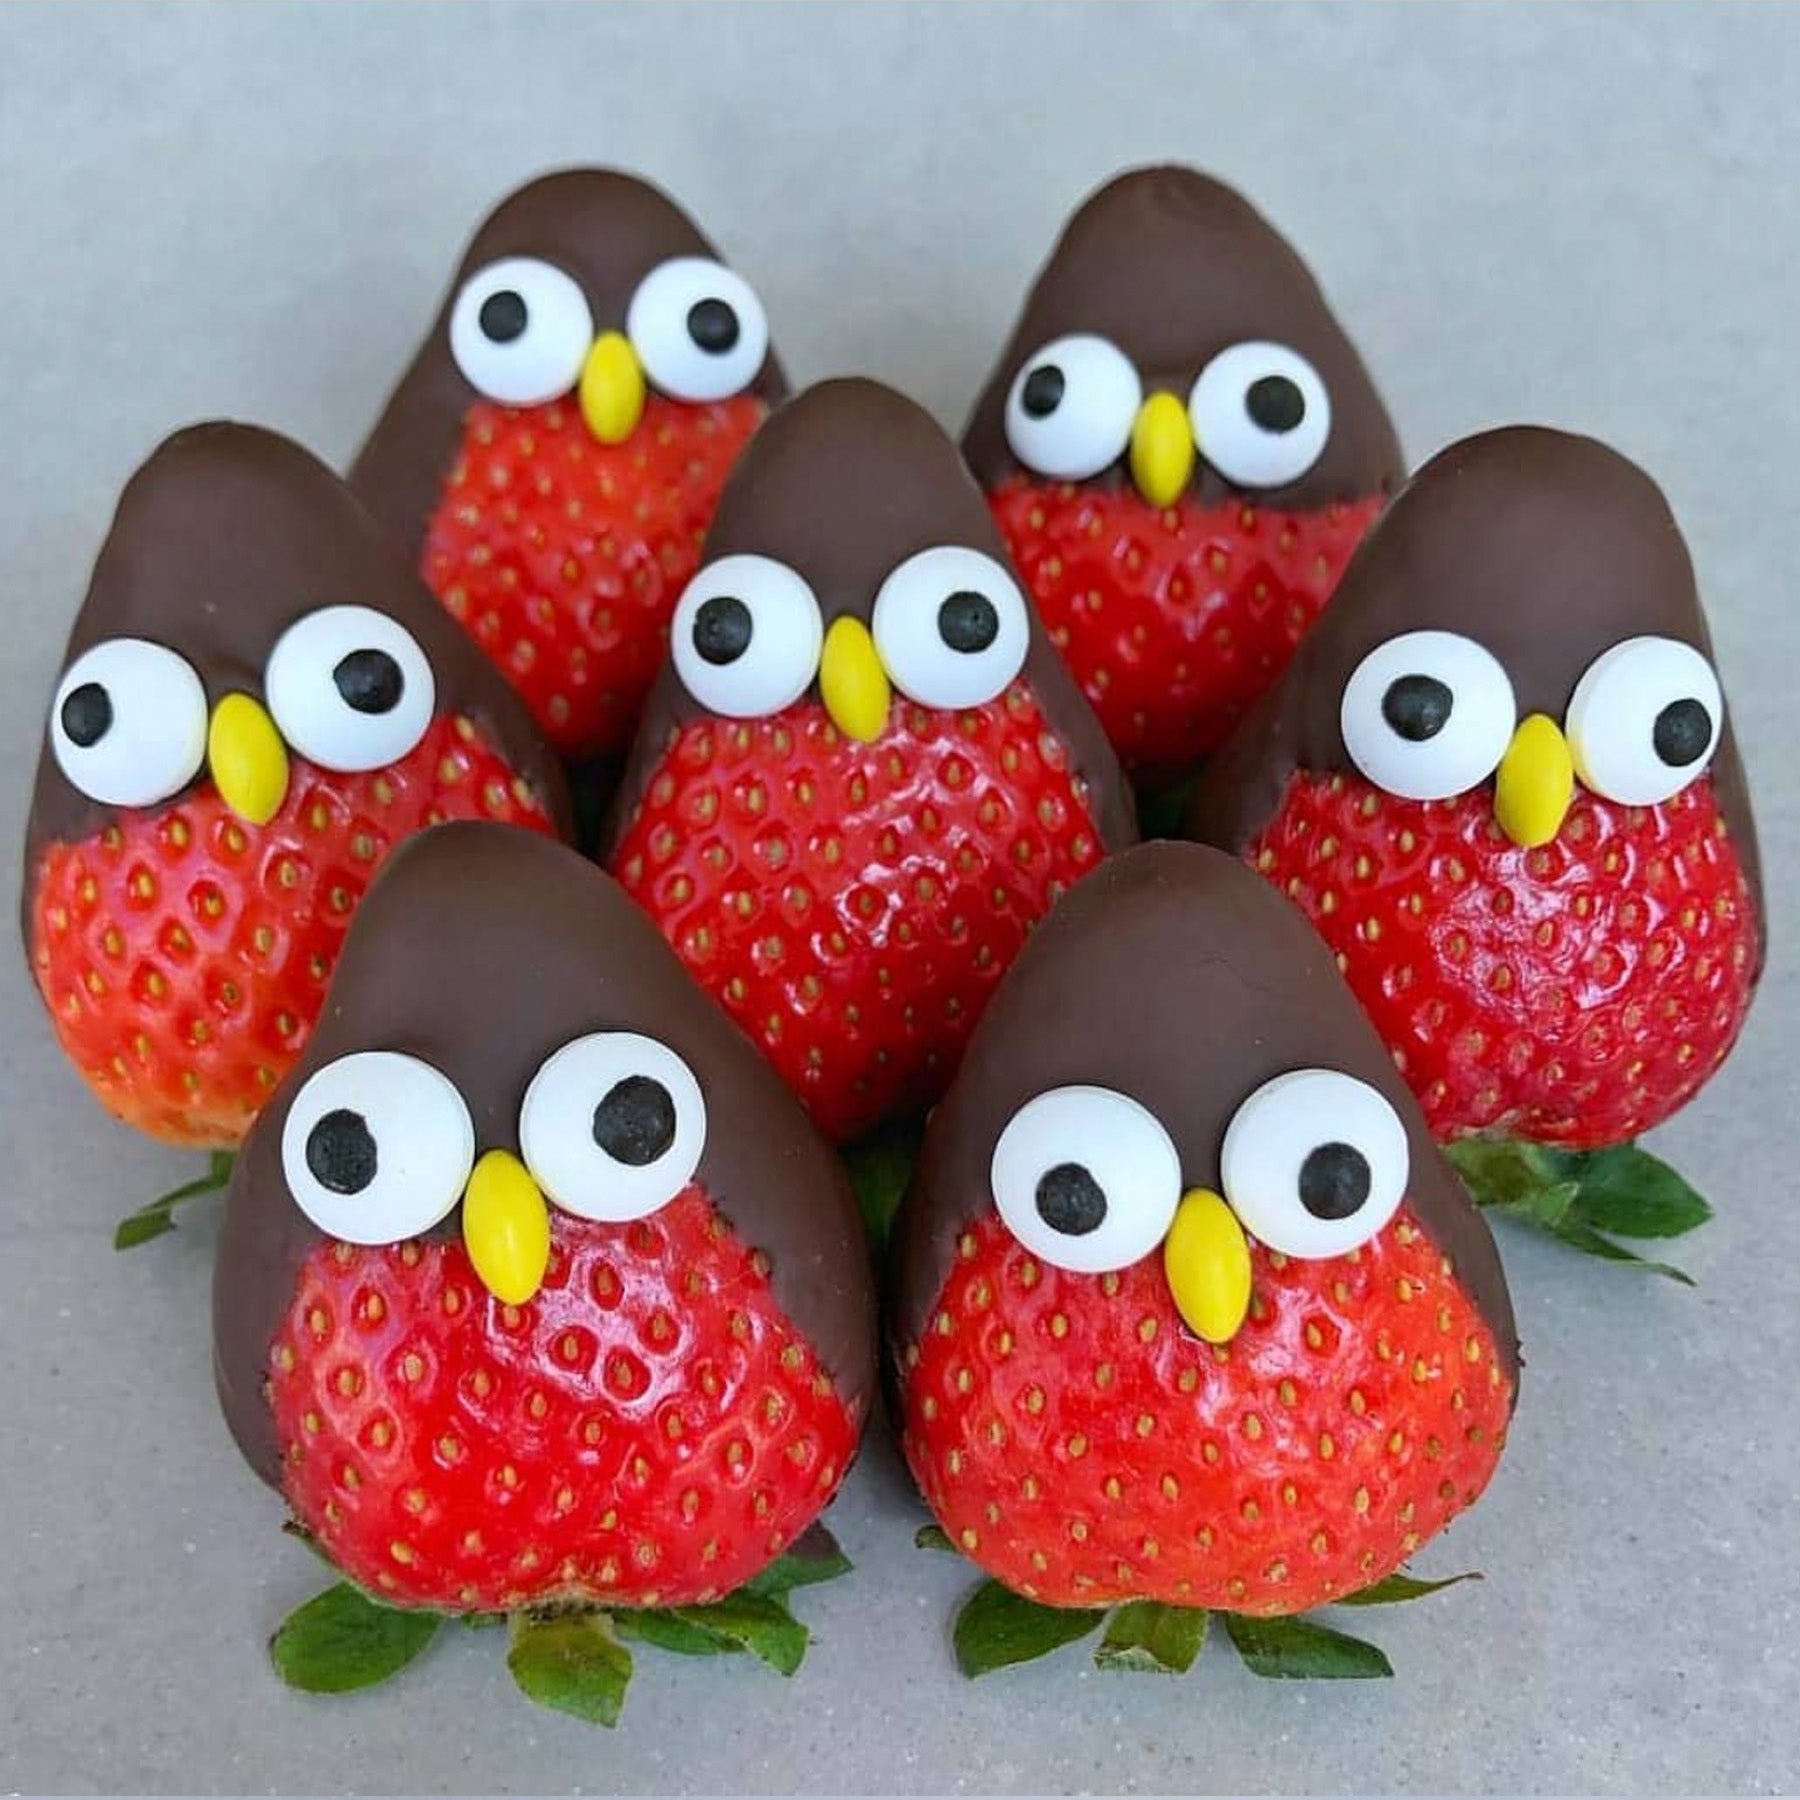 Private party venue for children workshop learn to make chocolate strawberries with children